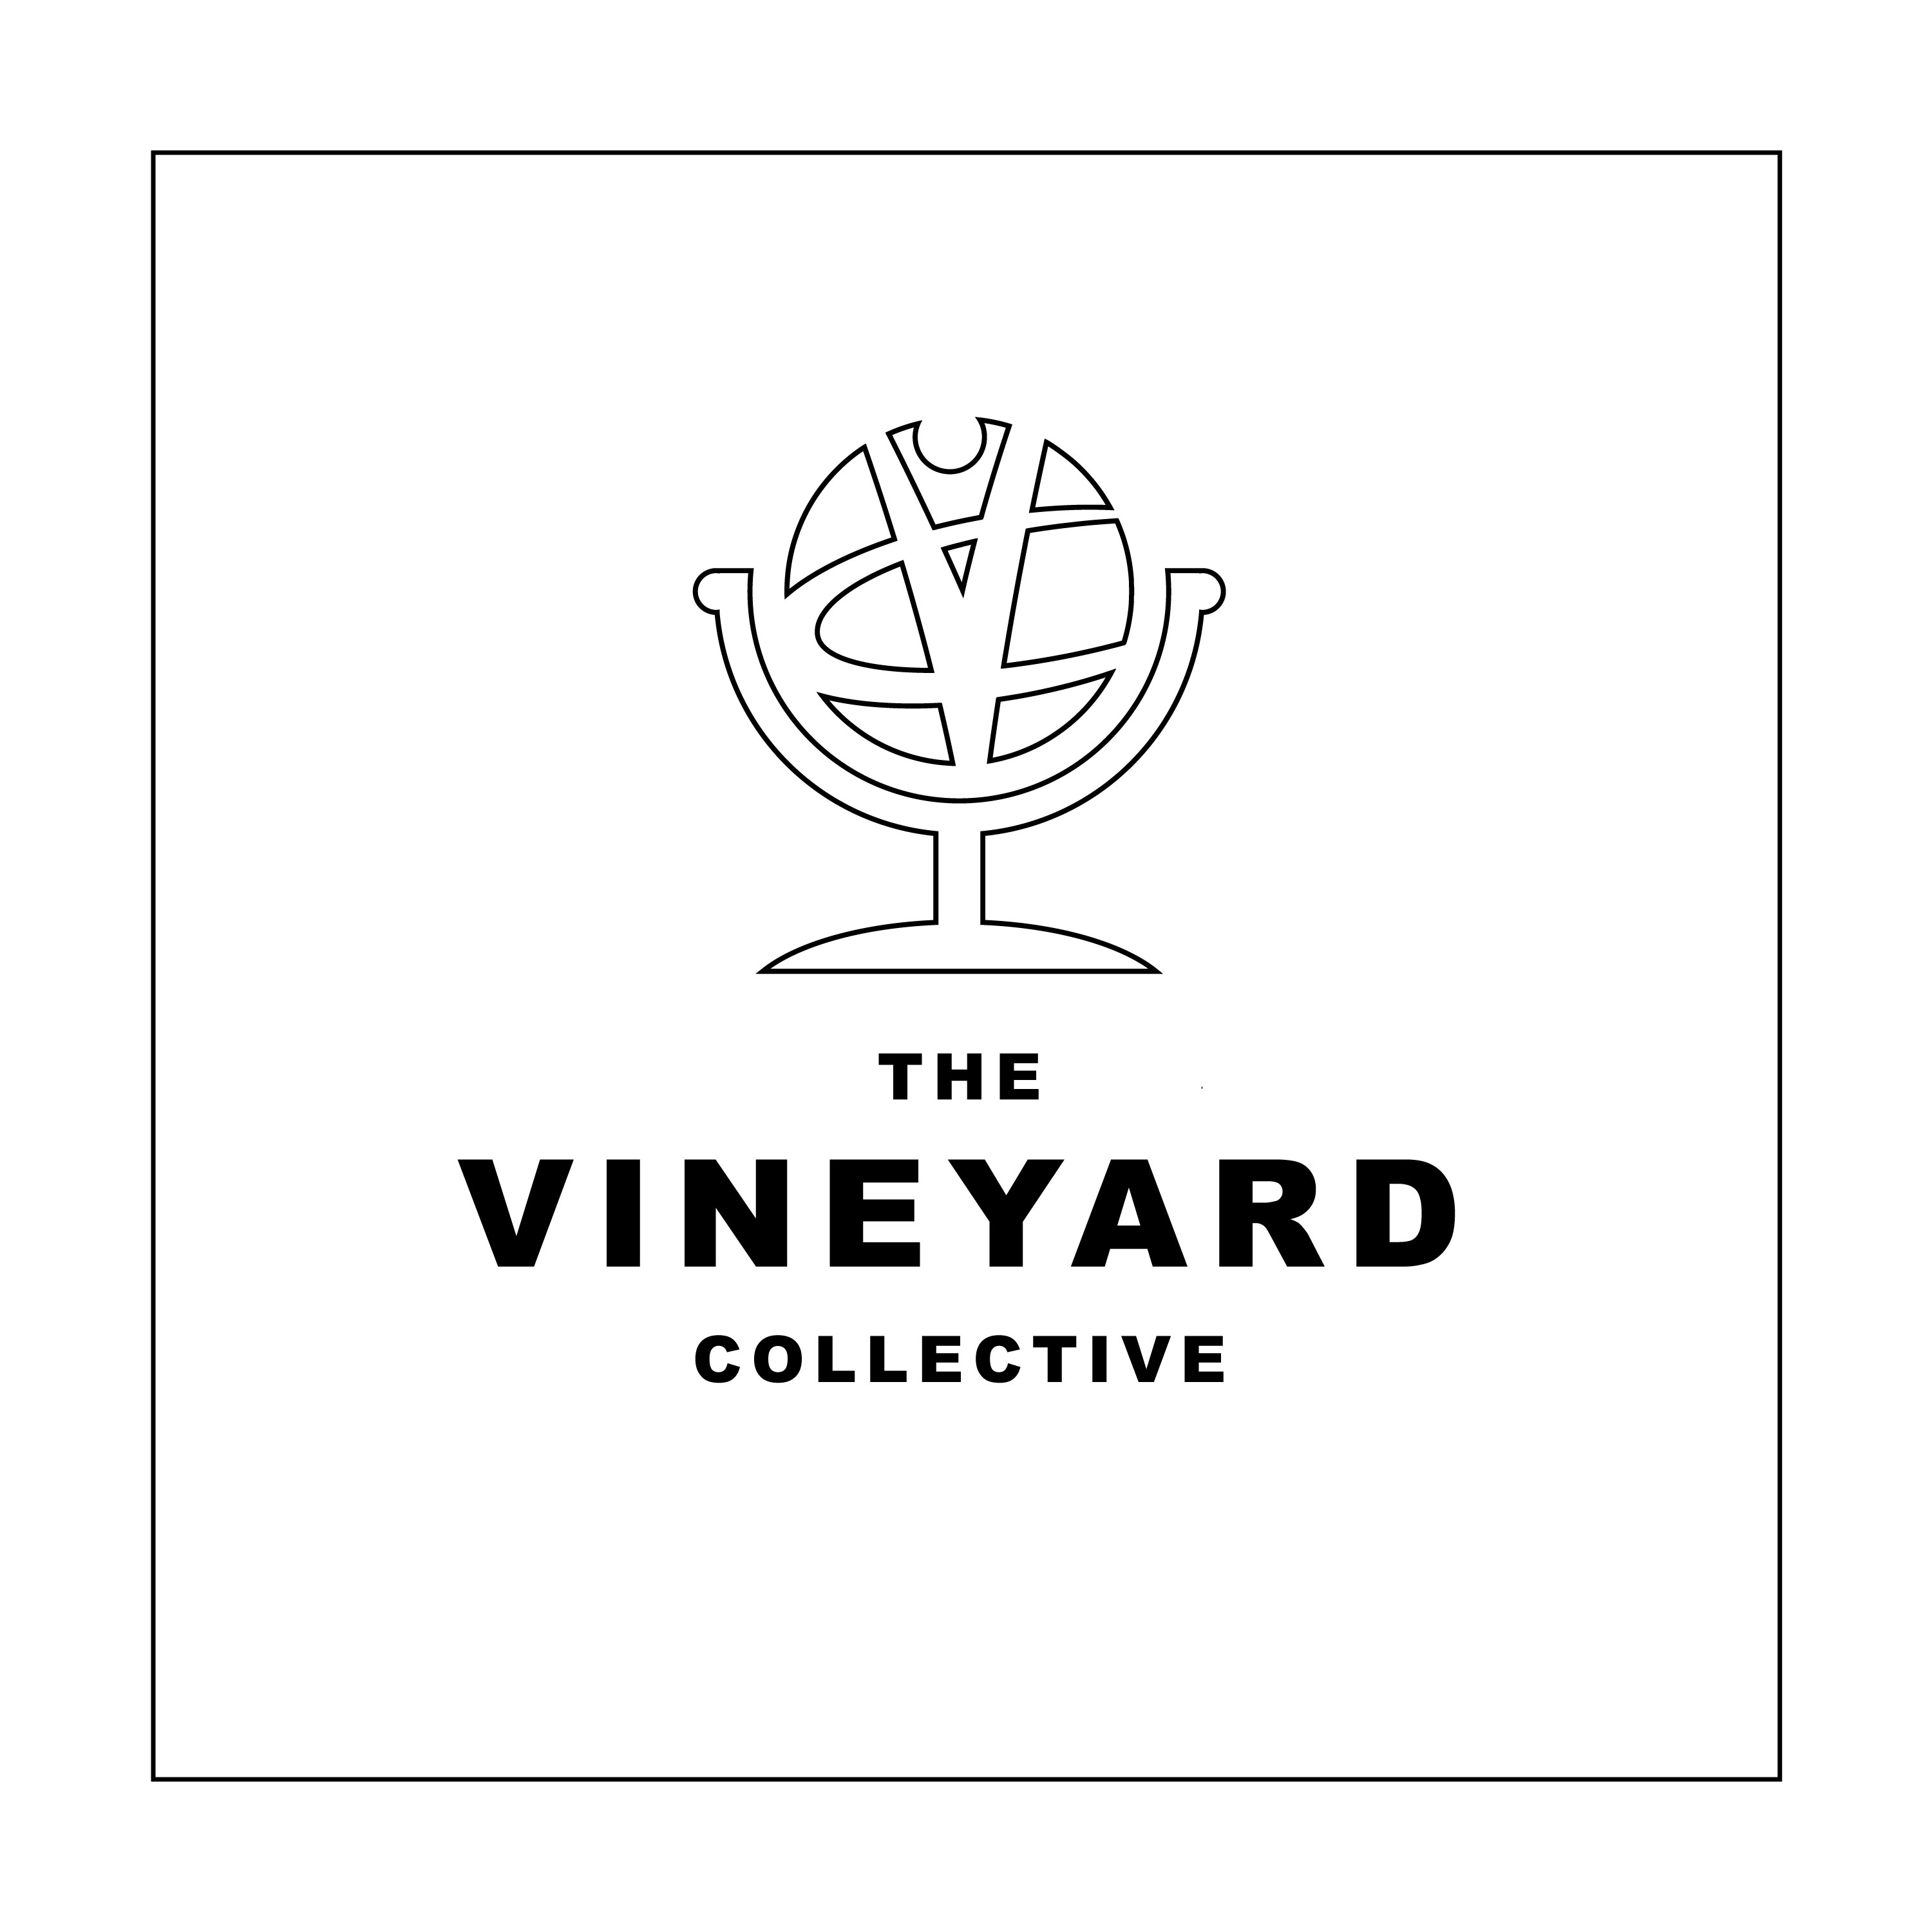 Artwork for The Vineyard Collective